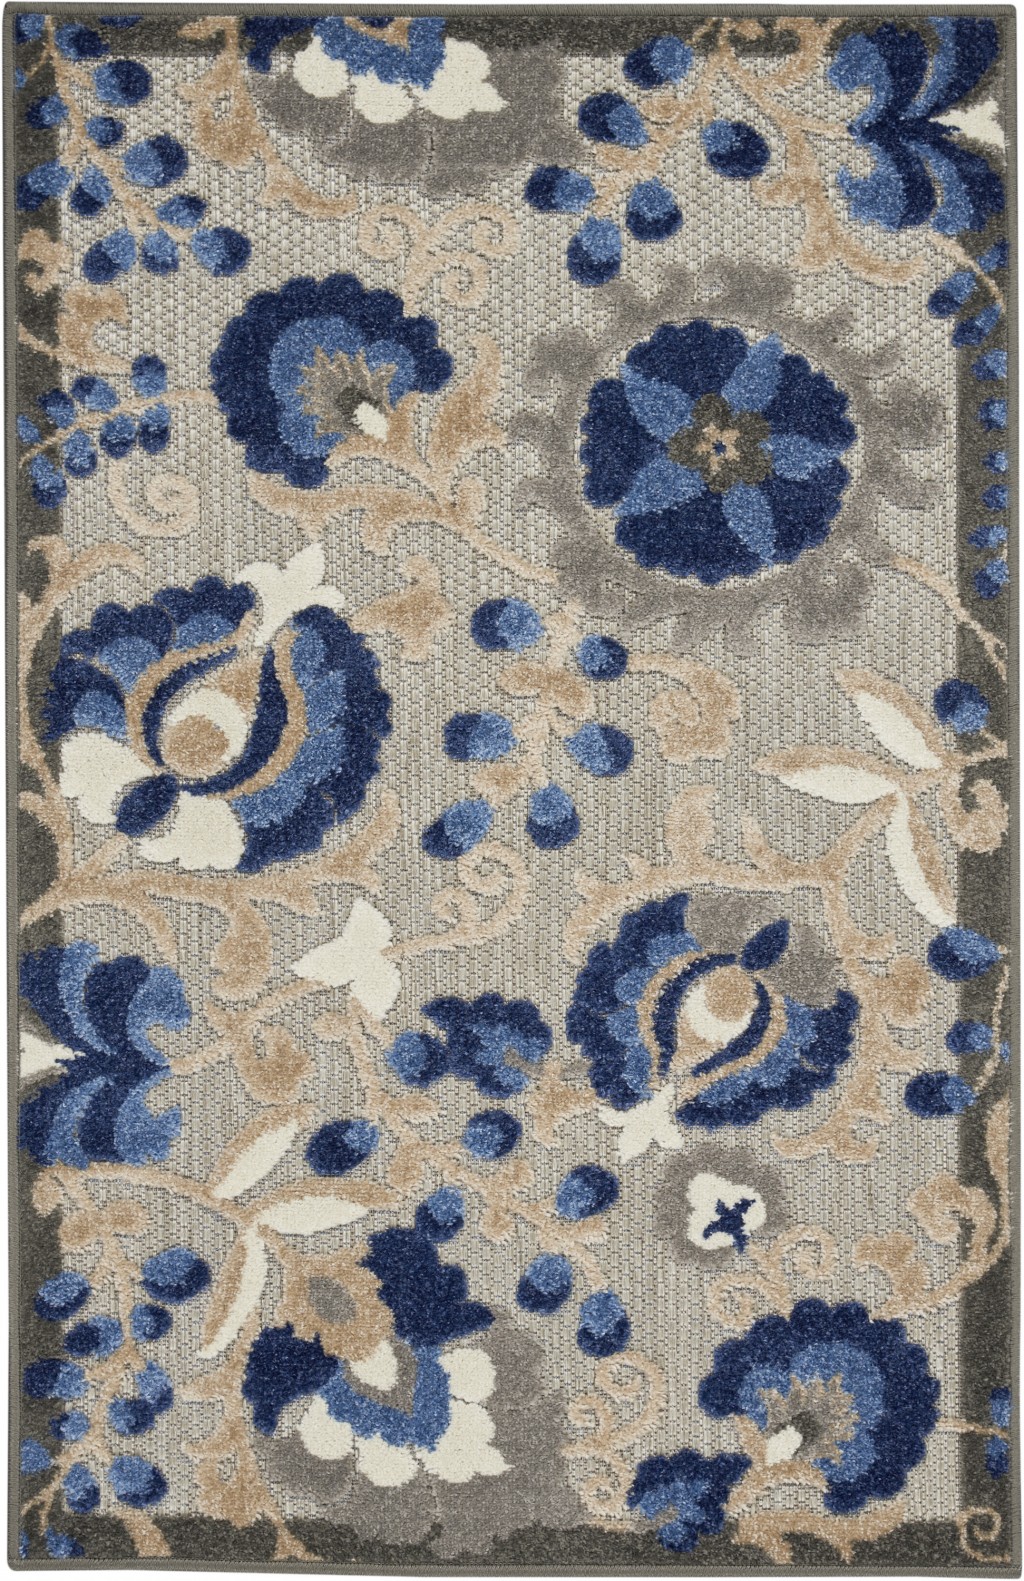 3' X 4' Blue And Gray Floral Indoor Outdoor Area Rug-384856-1